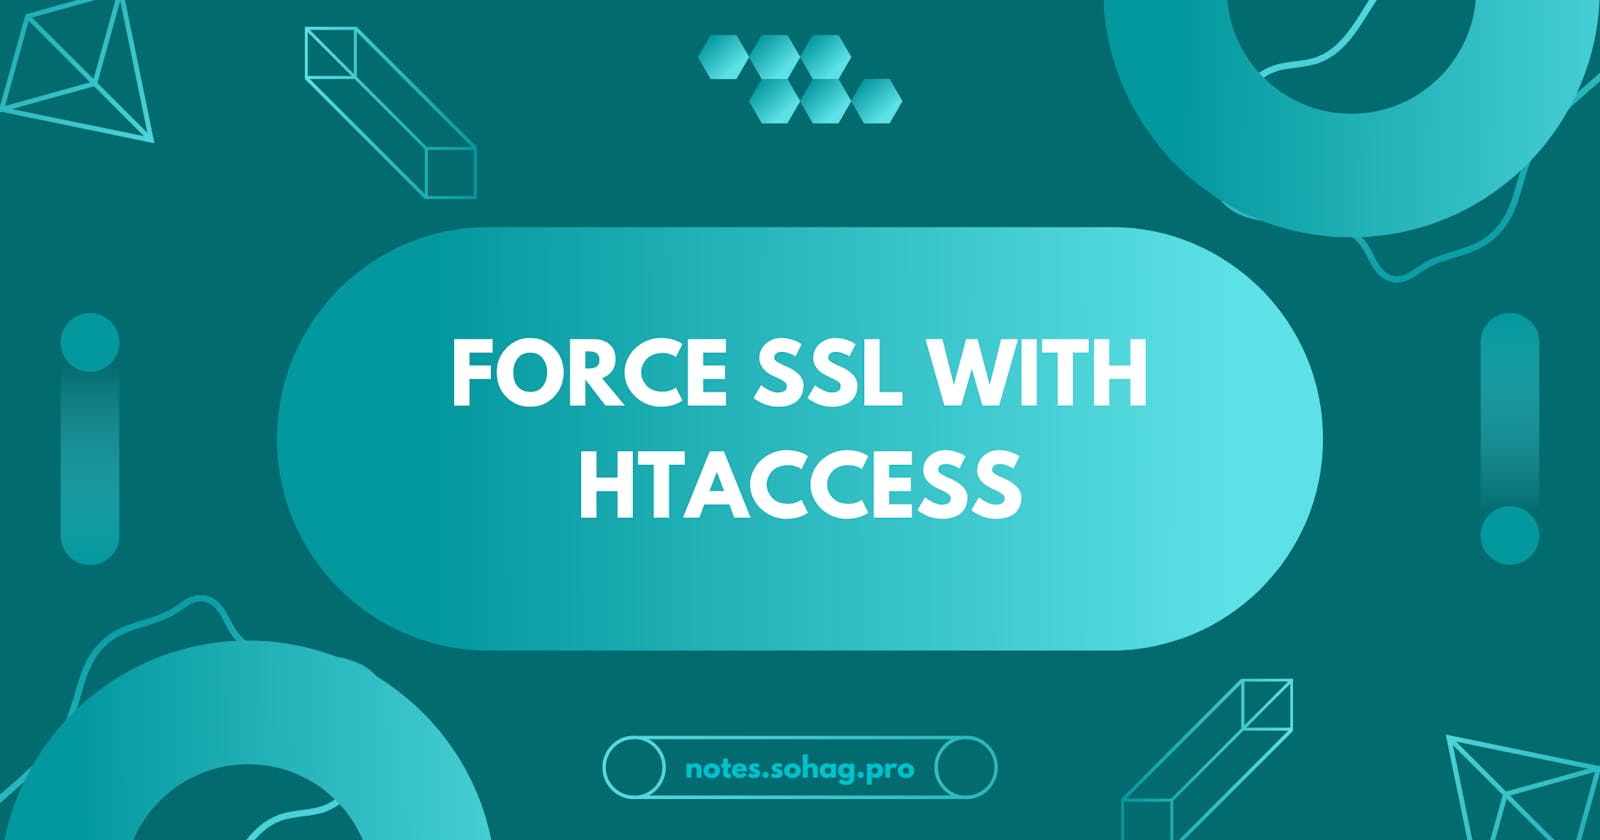 How to Force SSL with htaccess